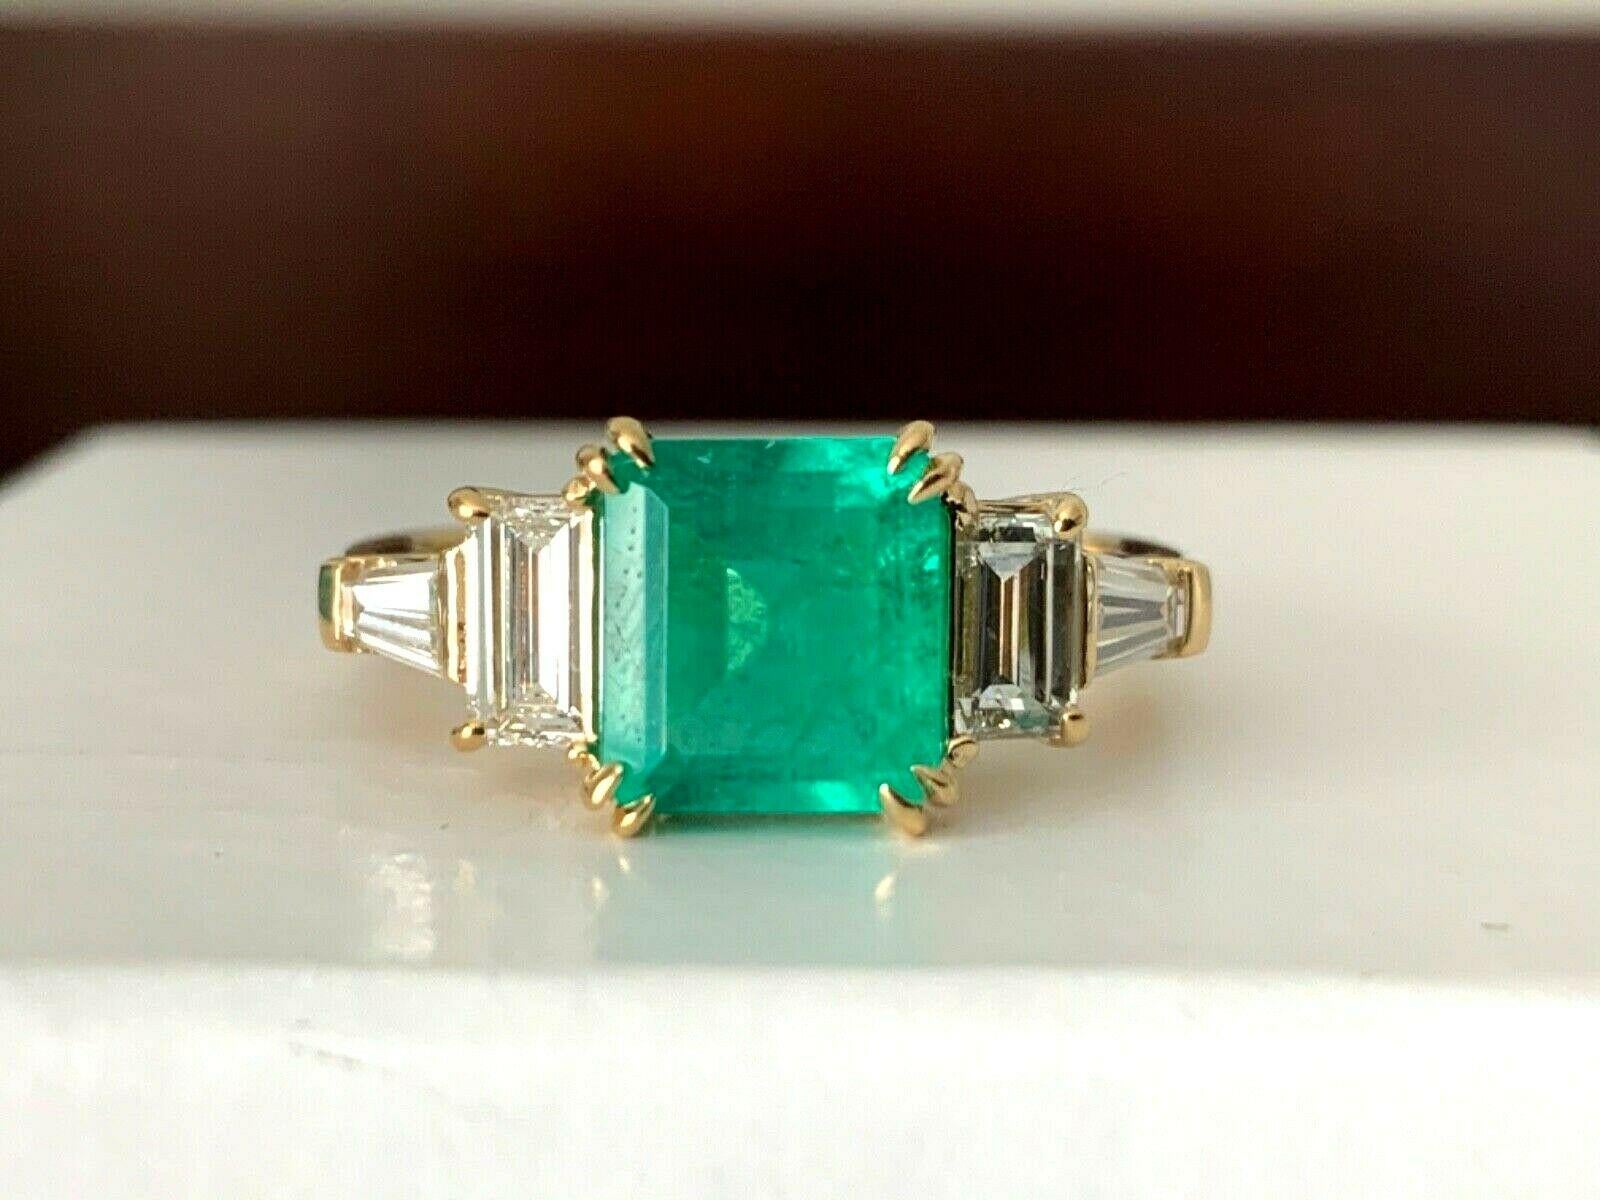 For your consideration is a 1.40 carat Octagonal step cut , natural, semi-transparent, green emerald set in a brand new 18k white gold setting with ..83 carats of natural G color VS clarity white diamonds.  The natural emerald is GIA certified and